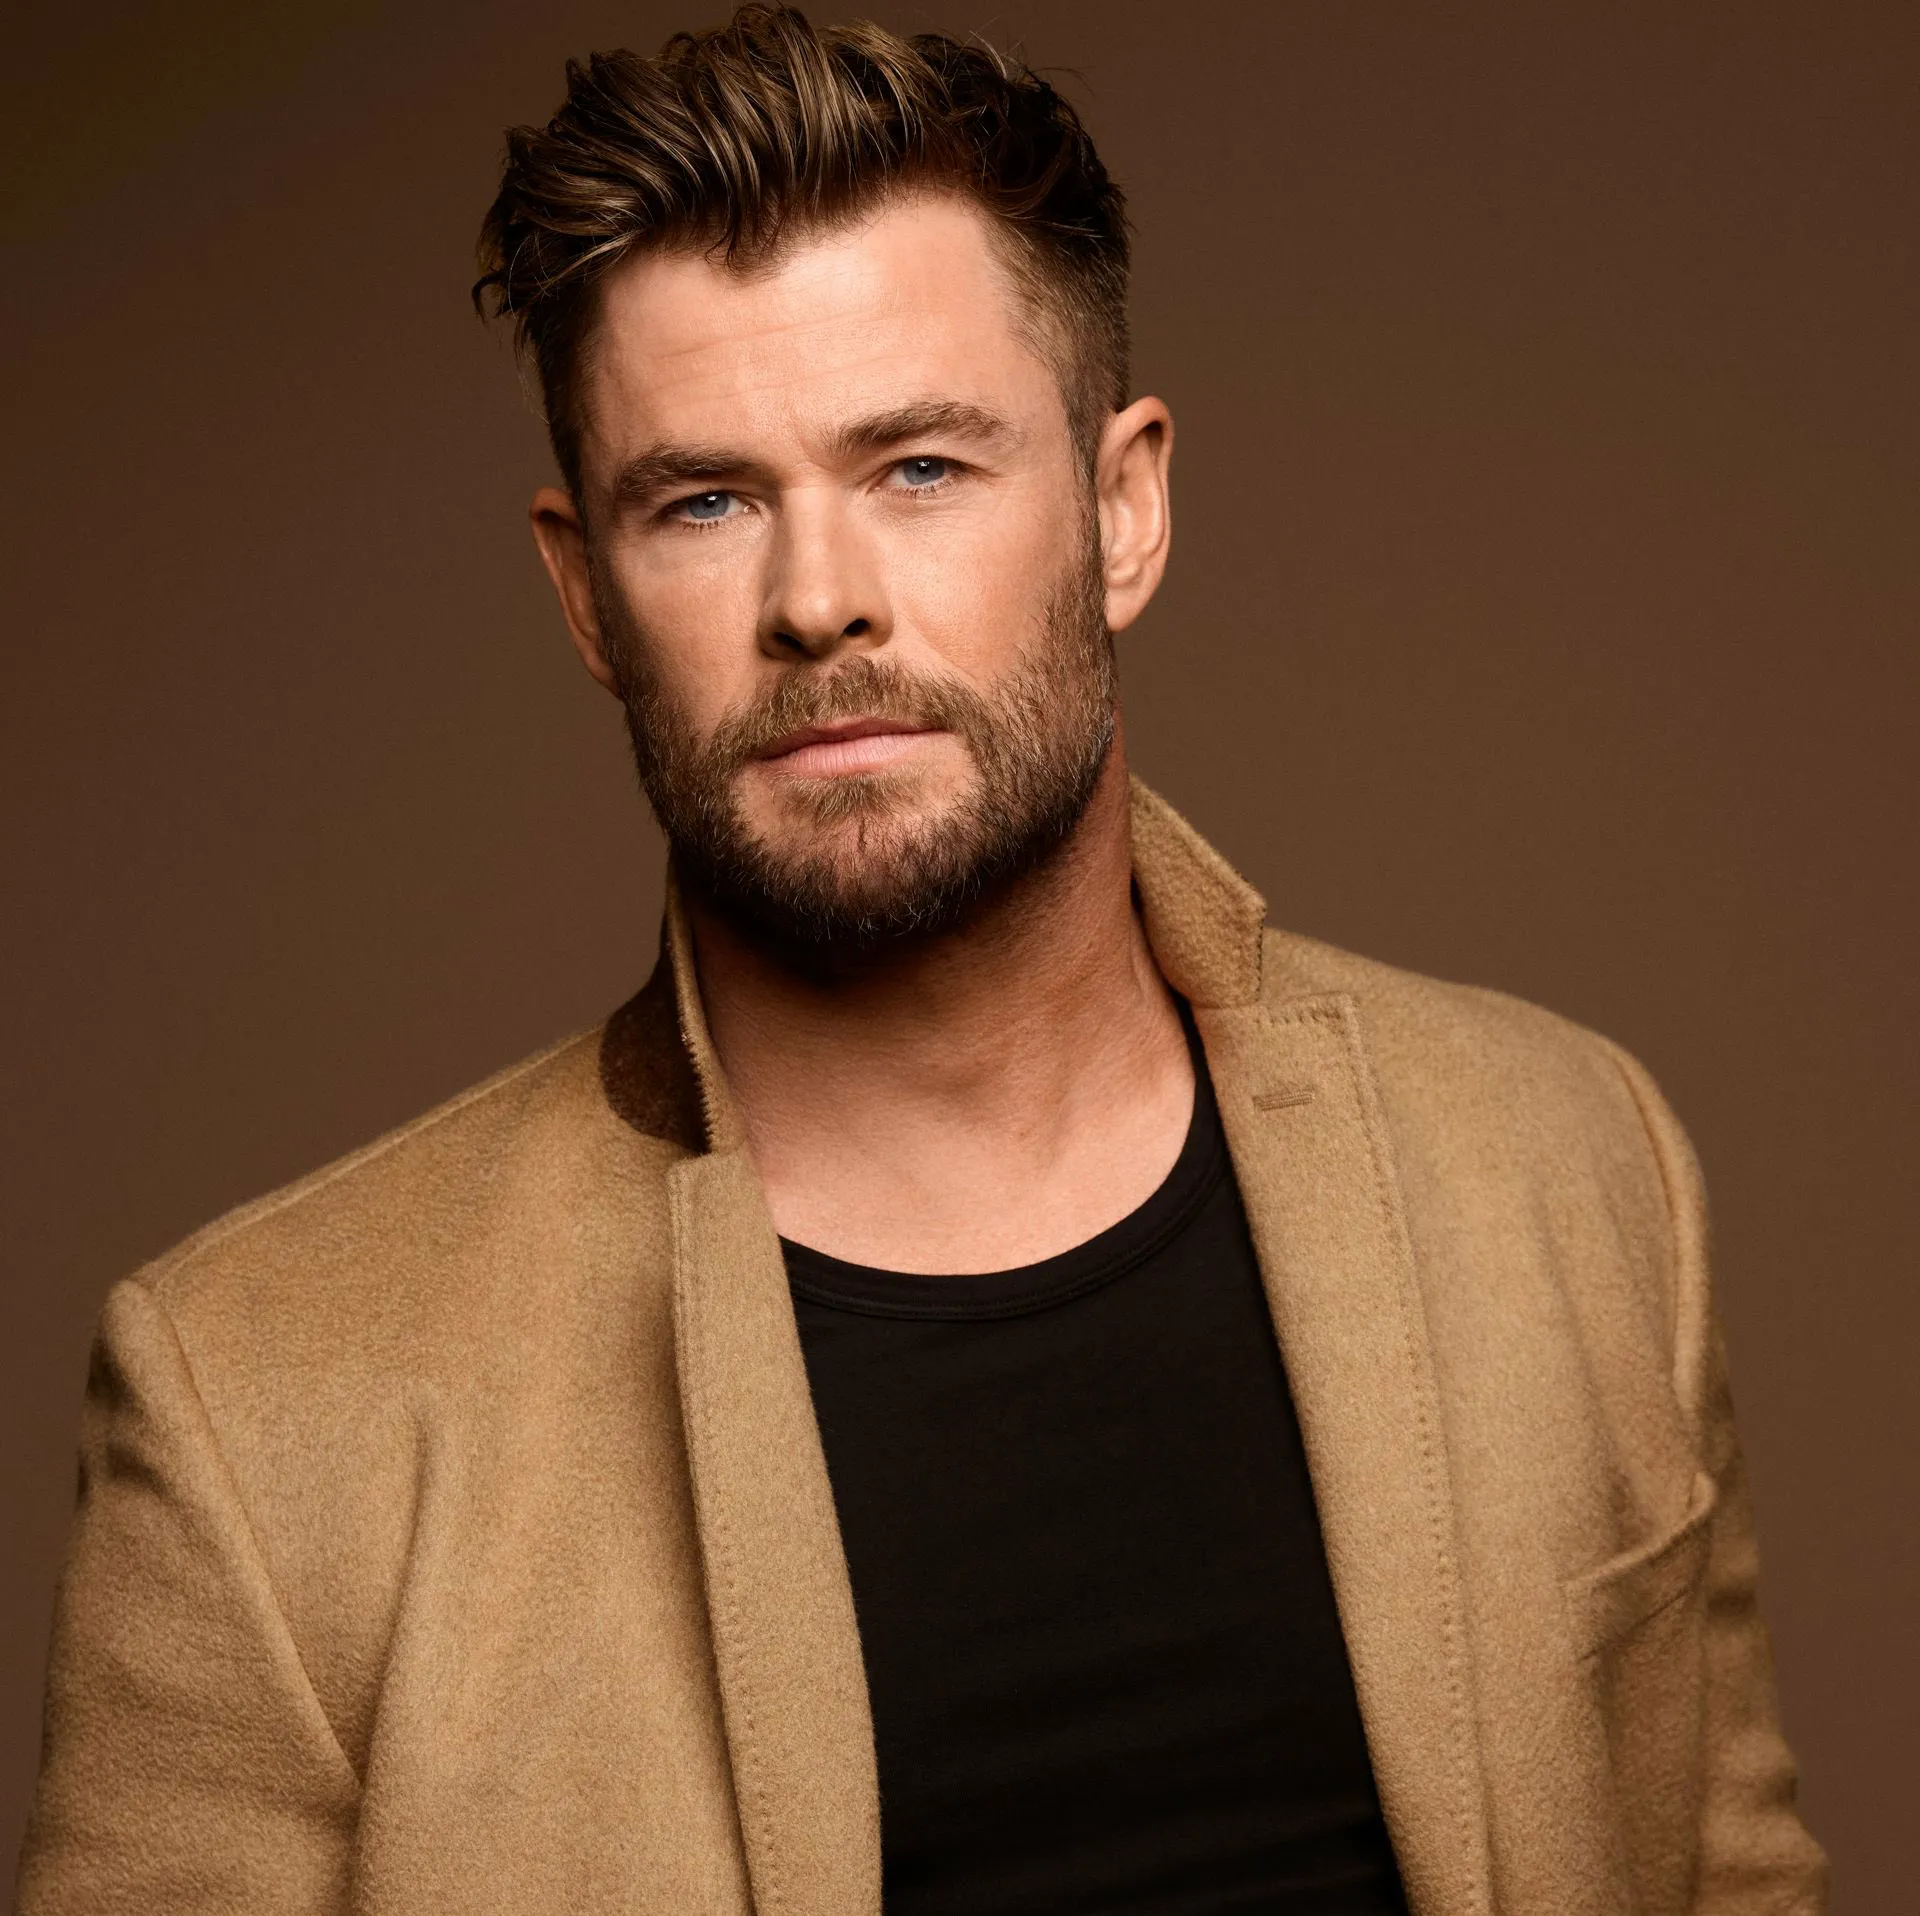 'Thor' actor Chris Hemsworth decides to take a break from acting | FMV6